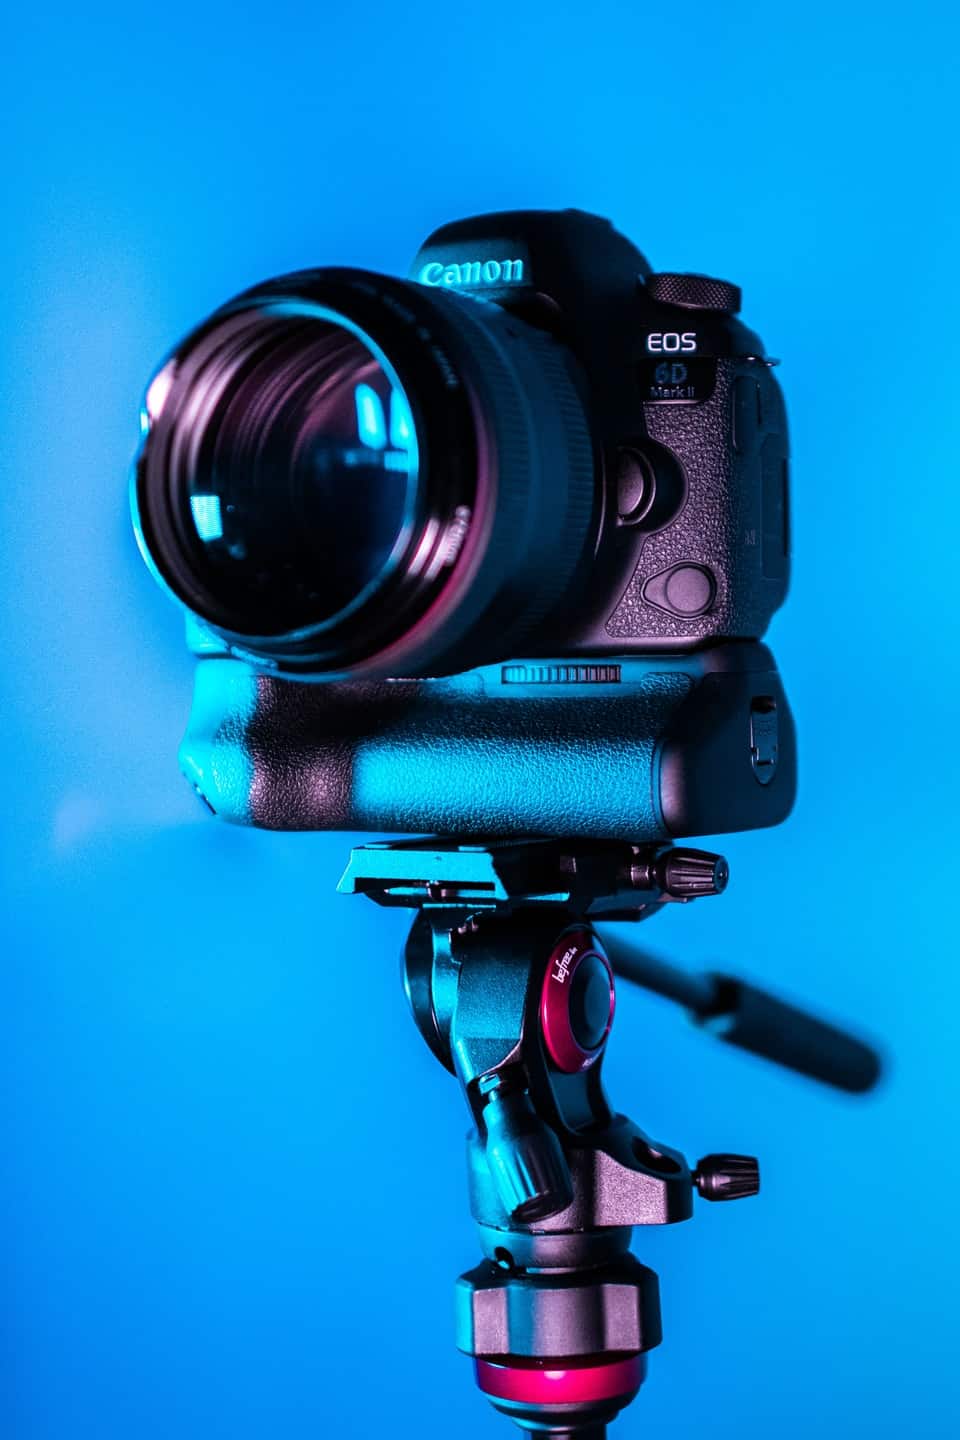 Canon camera on tripod with blue background